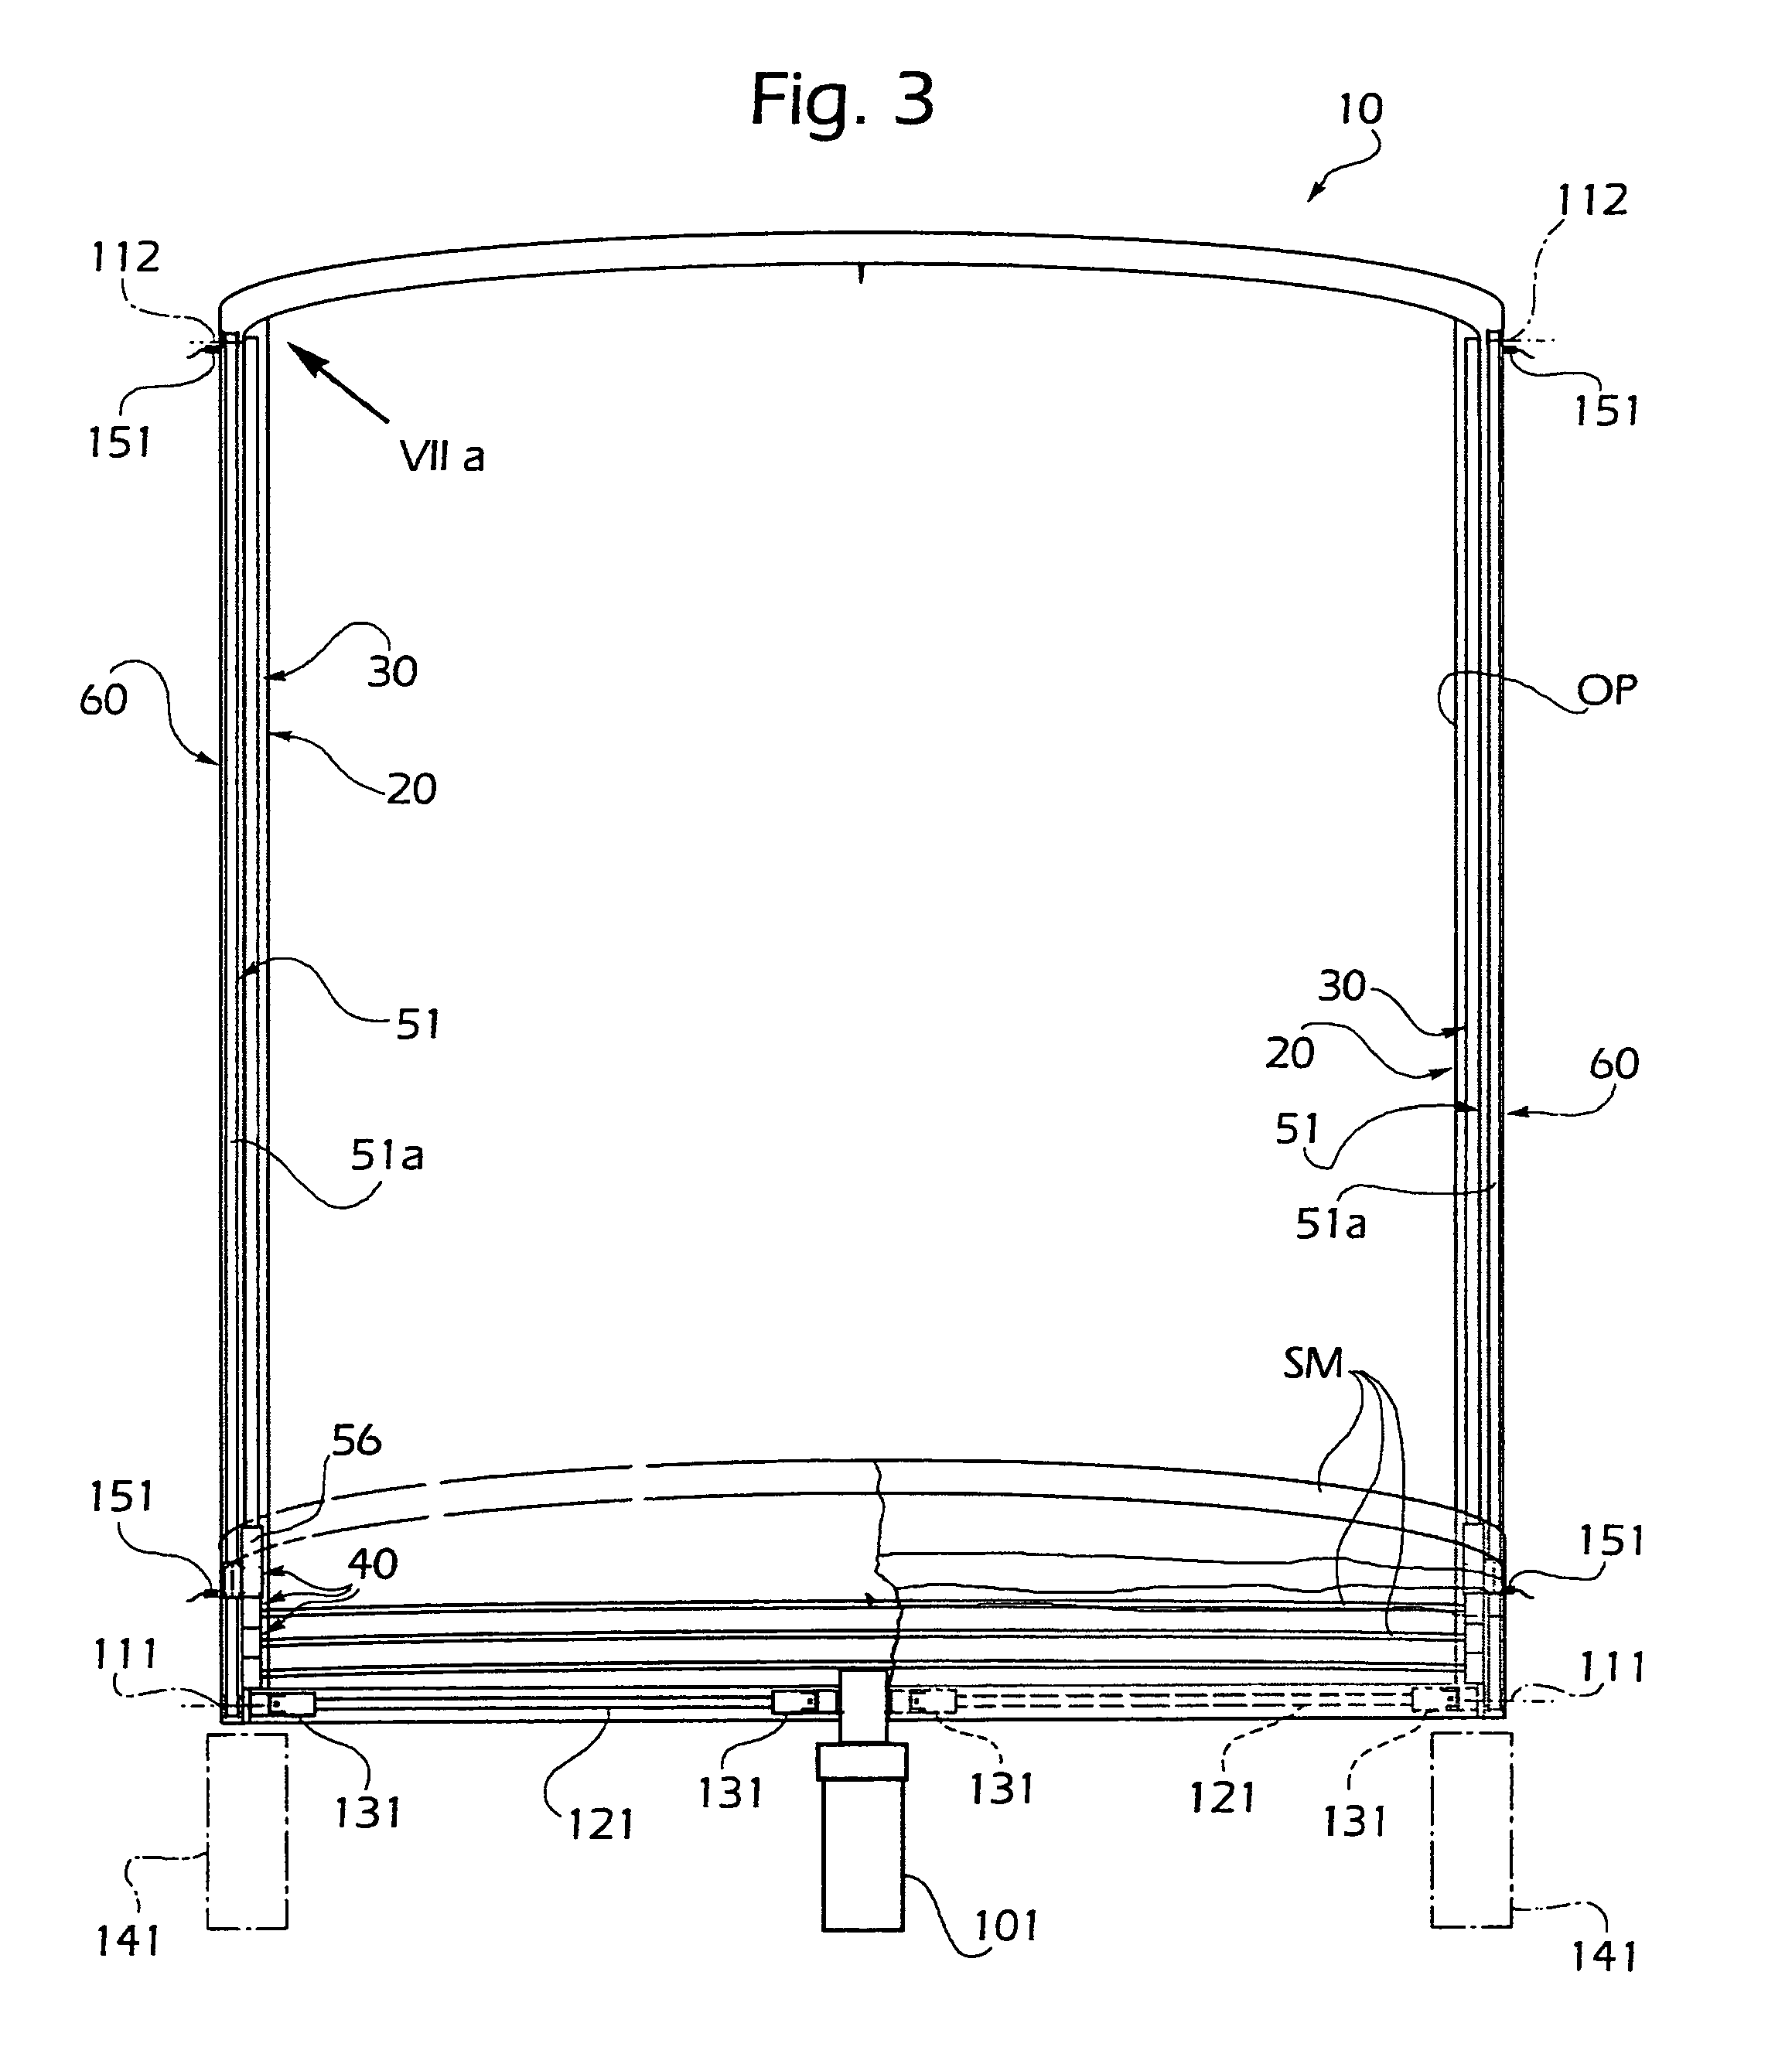 Modular movement support system for an openable roof for a vehicle, in particular for a boat